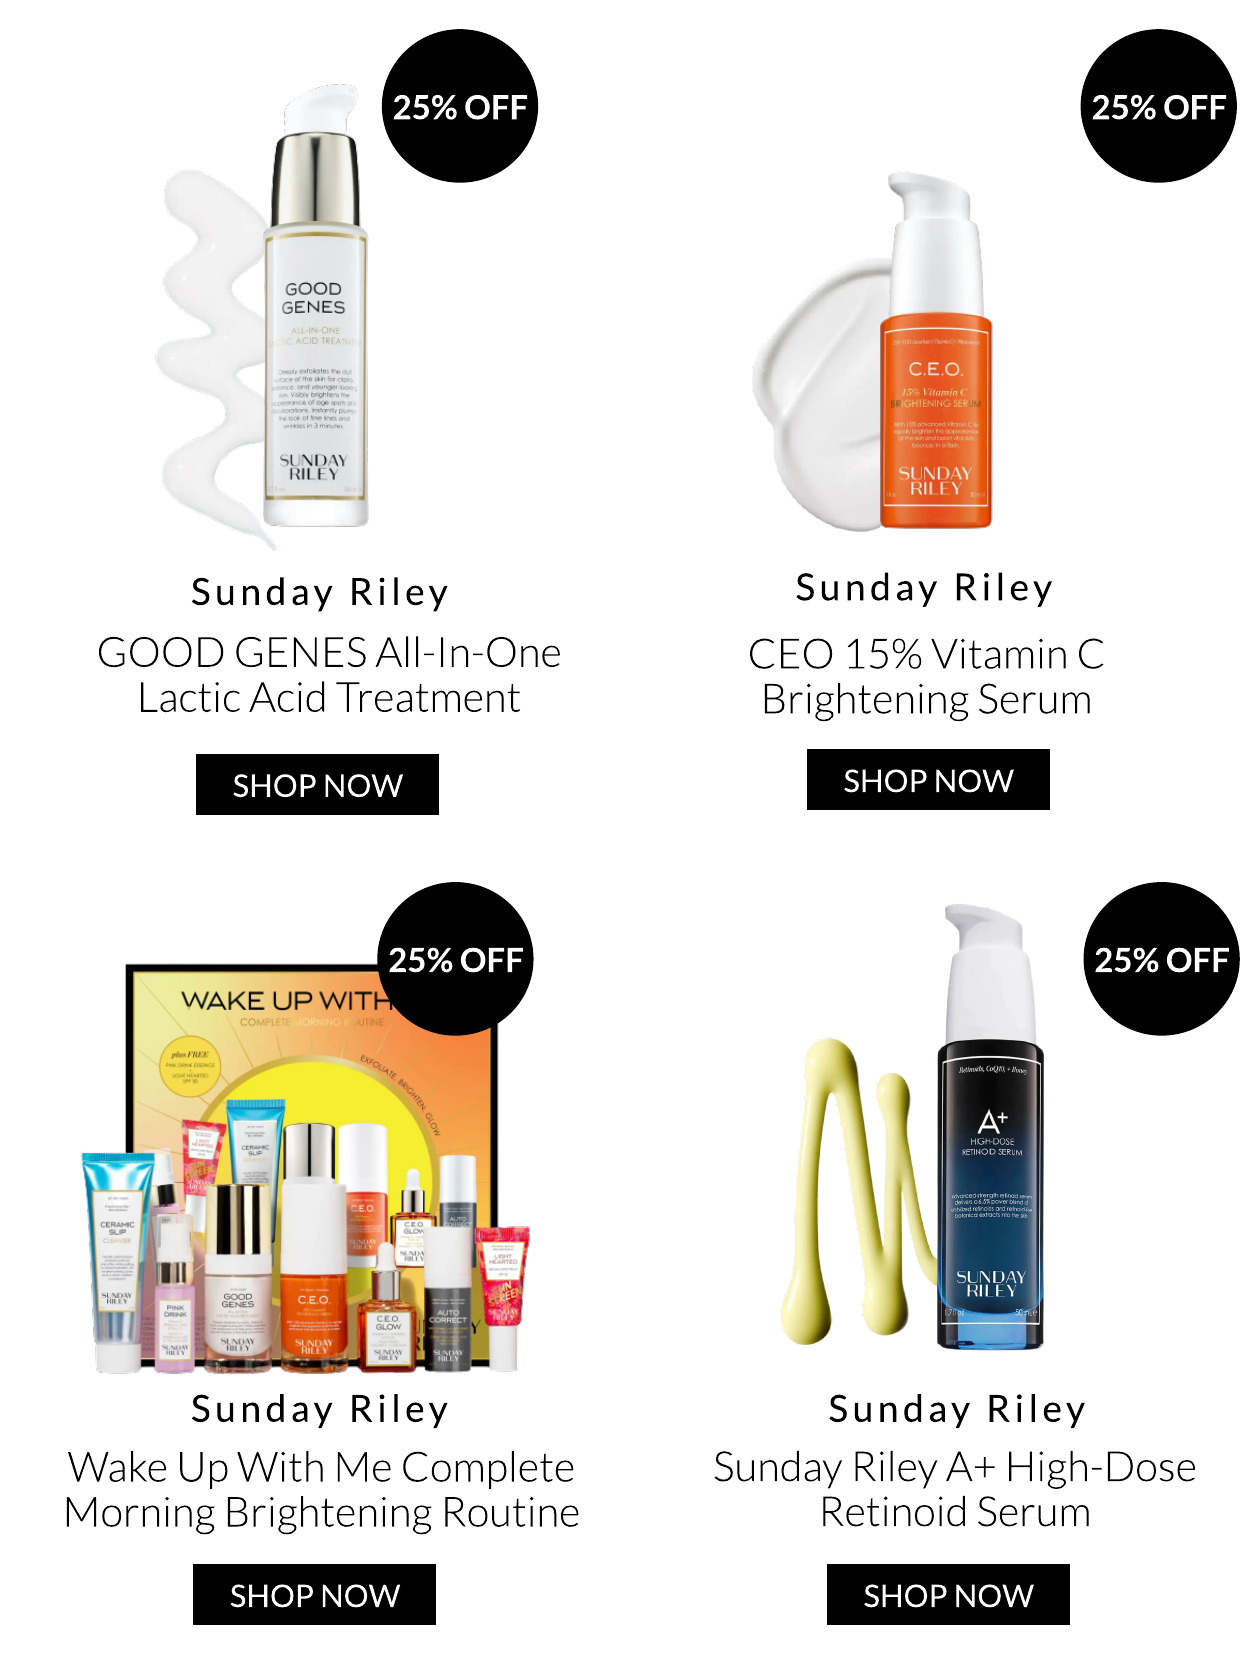 1 GOOD GENES SUNDAY RILEY Sunday Riley GOOD GENES All-In-One Lactic Acid Treatment SHOP NOW 25% OFF Sunday Riley Wake Up With Me Complete Morning Brightening Routine SHOP NOW SUNDAY N Sunday Riley CEO 15% Vitamin C Brightening Serum SHOP NOW Sunday Riley Sunday Riley A High-Dose Retinoid Serum SHOP NOW 